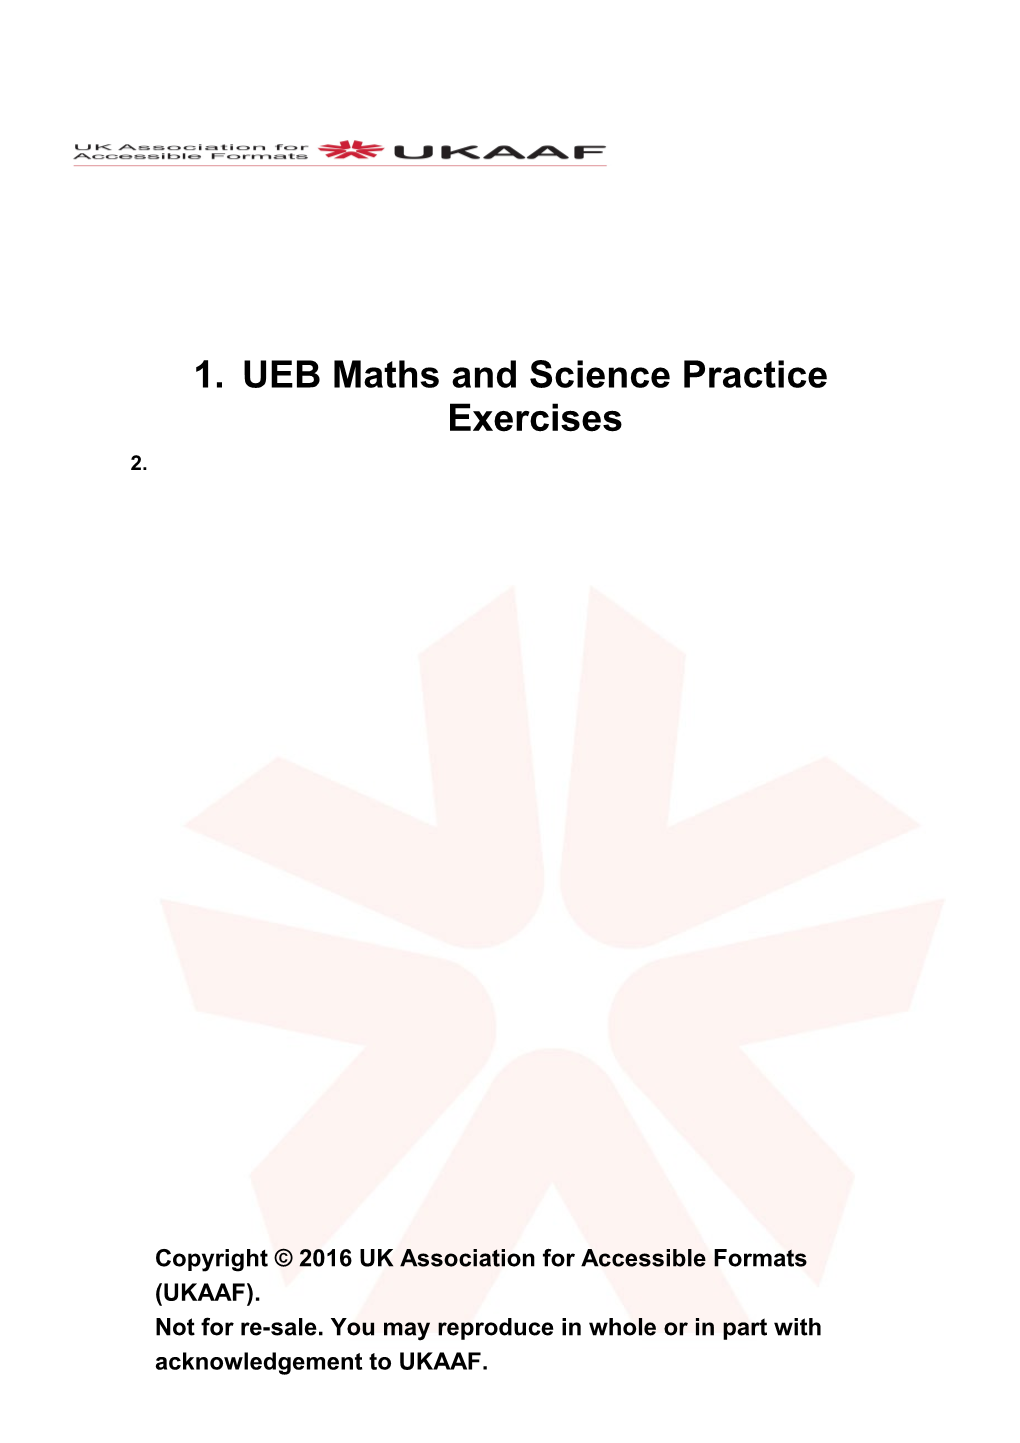 UEB Maths and Science Practice Exercises